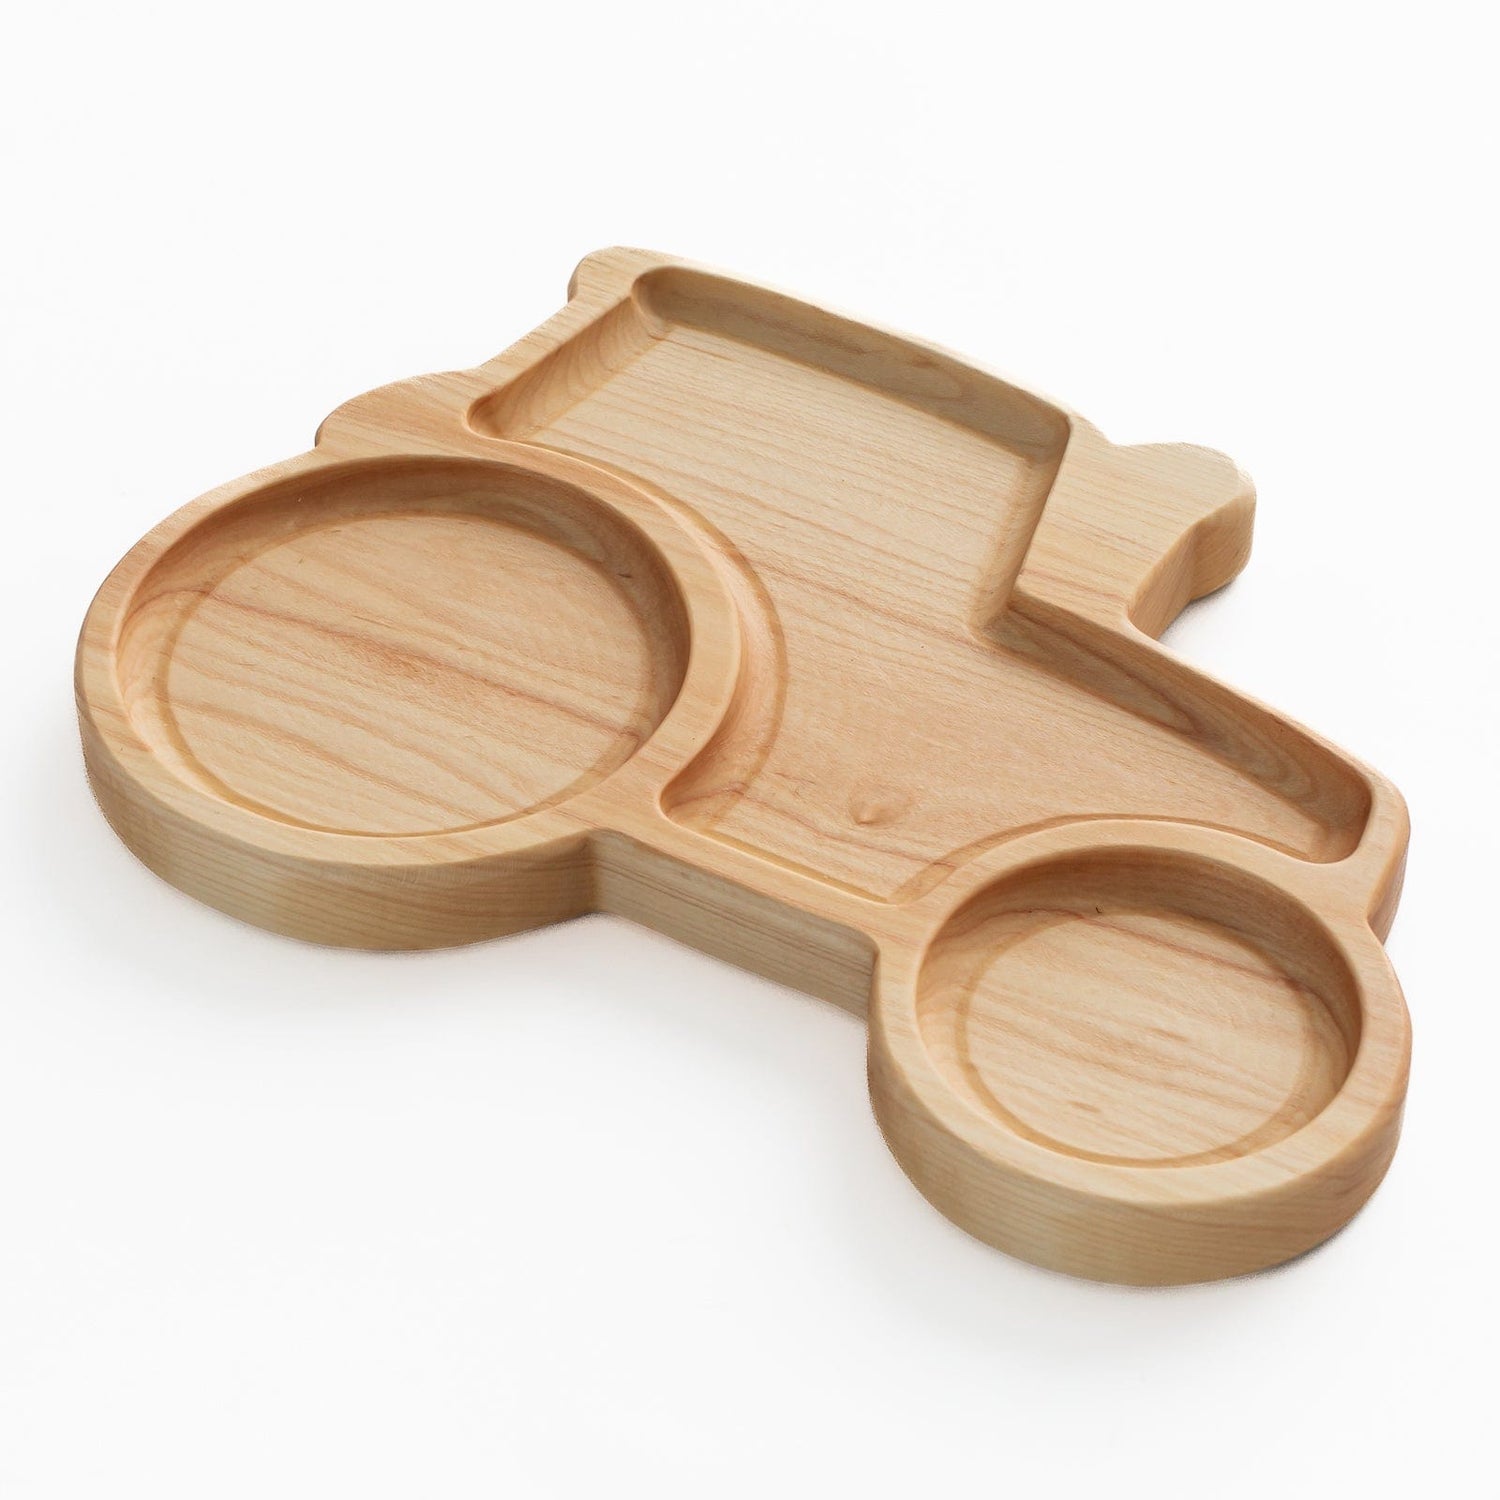 Aw & Co. Sensory Play Wooden Tractor Plate / Sensory Tray (Made in Canada)